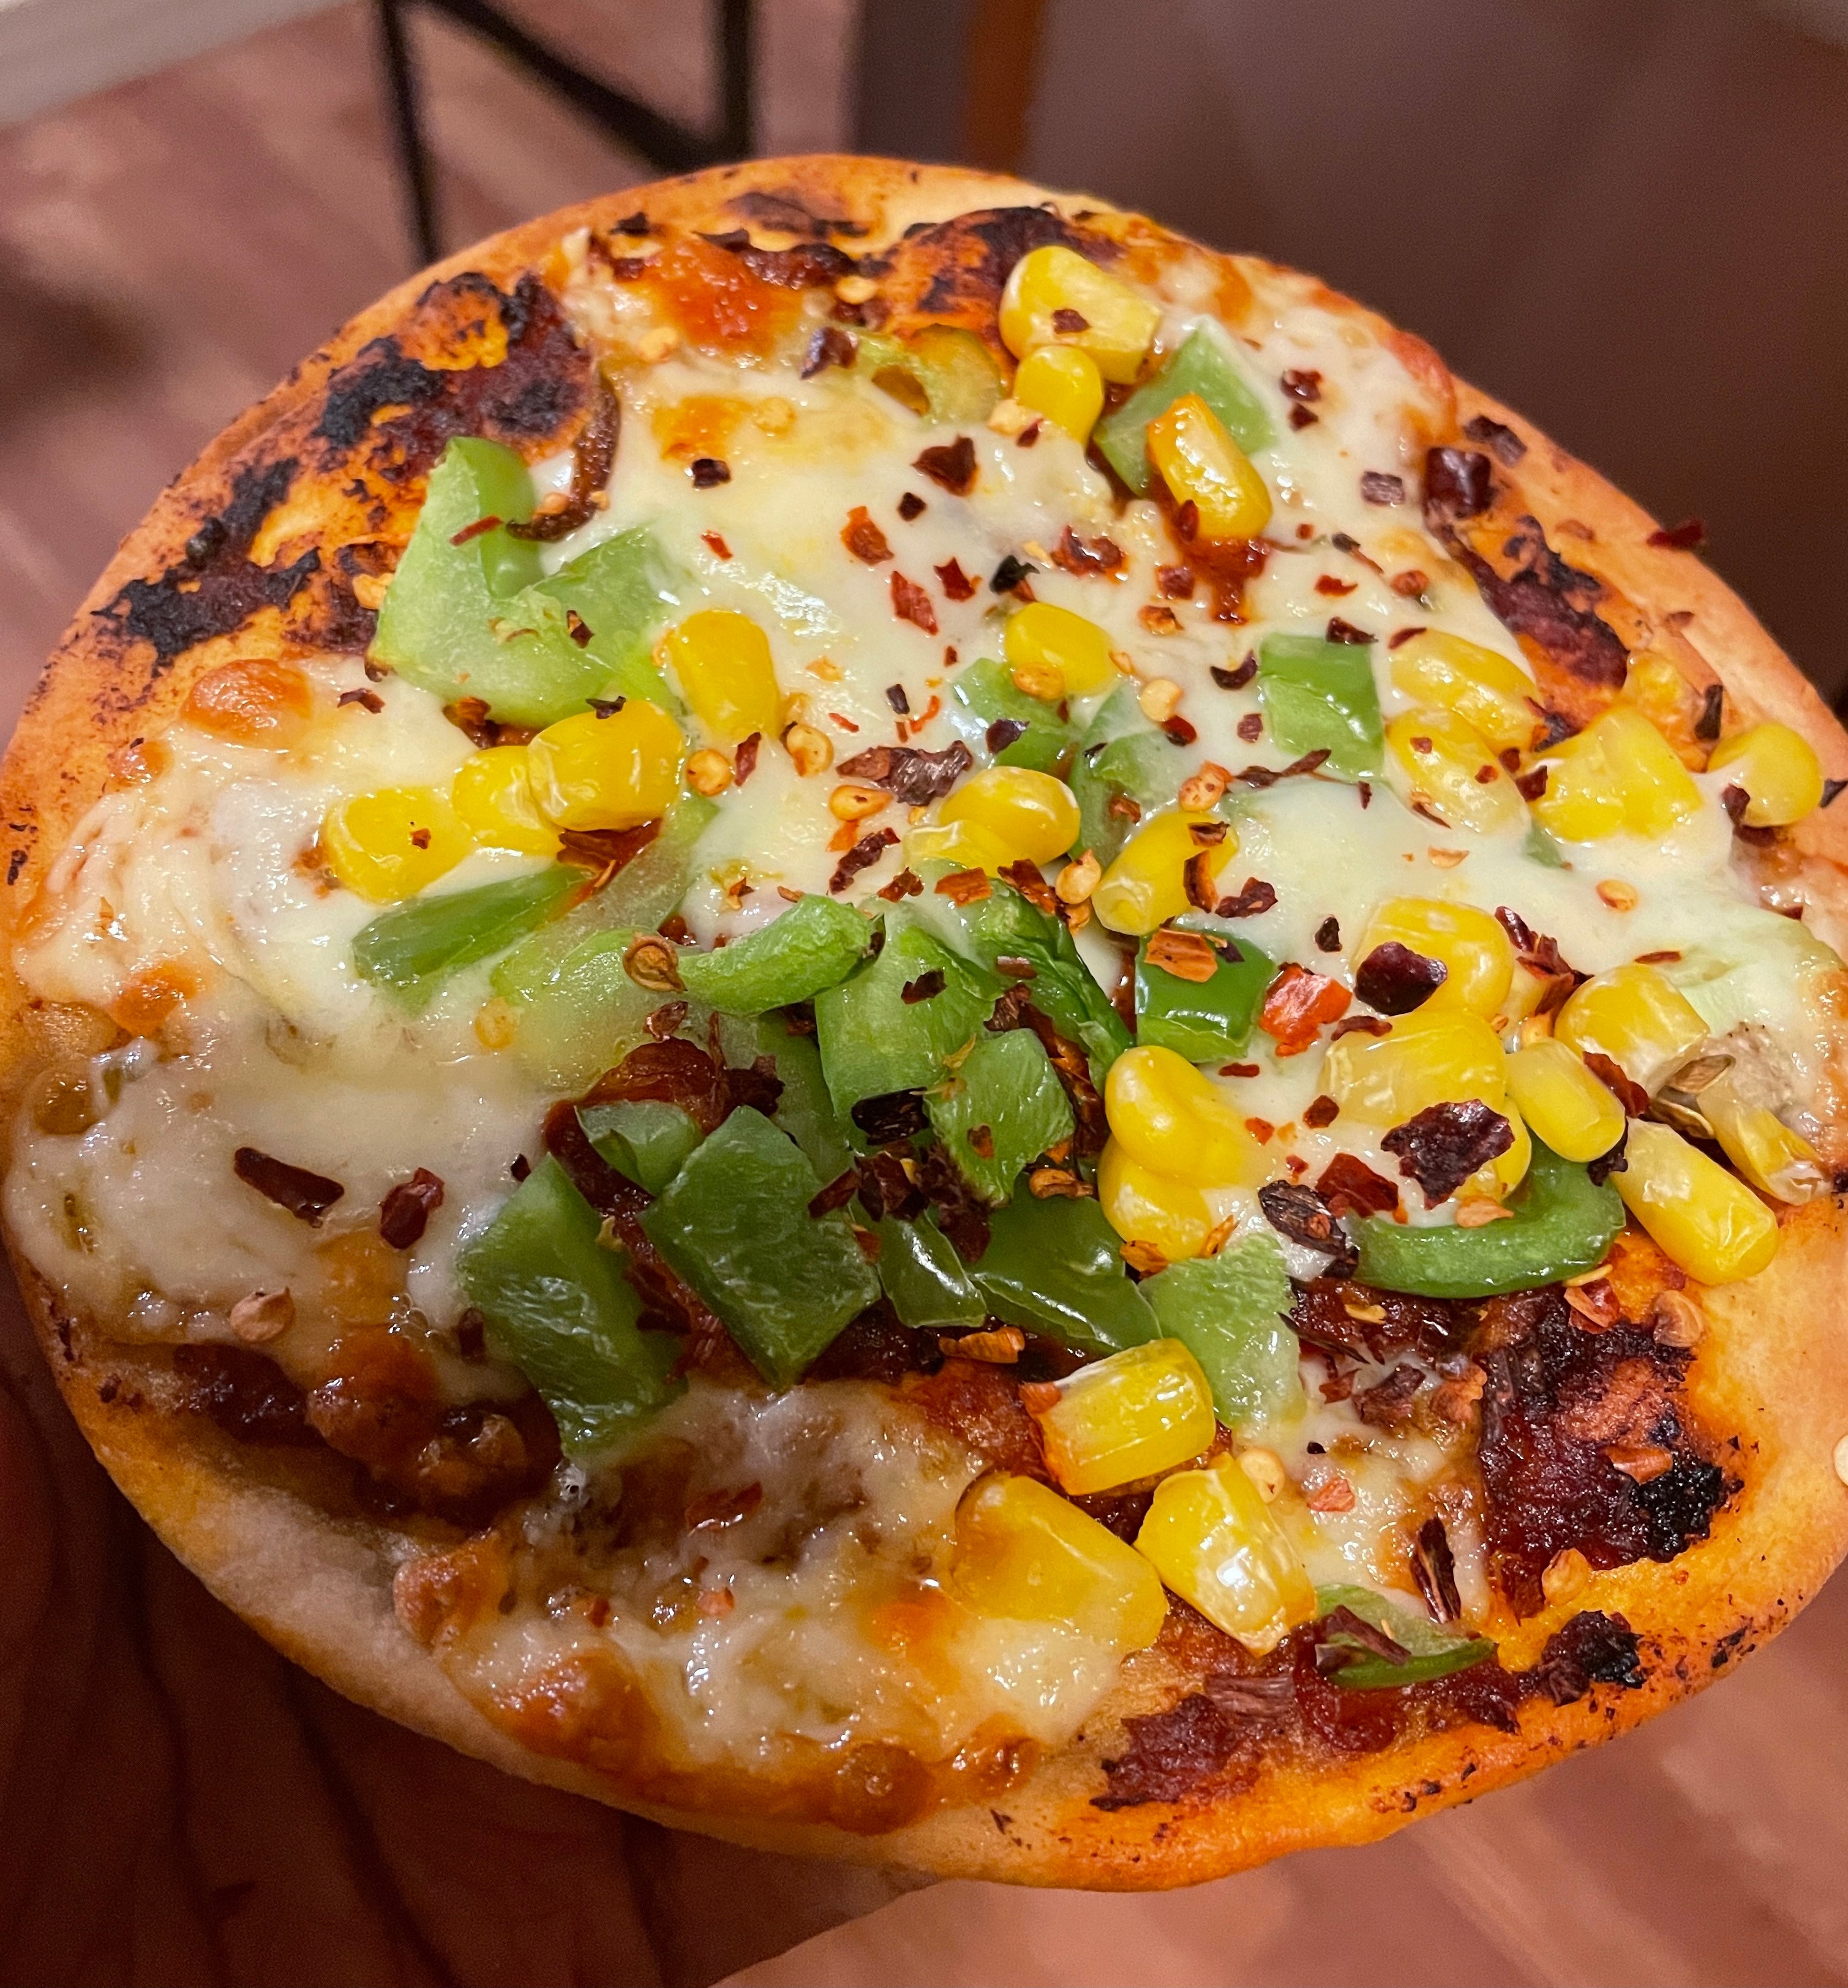 Pizza made in an Indian style with Naan